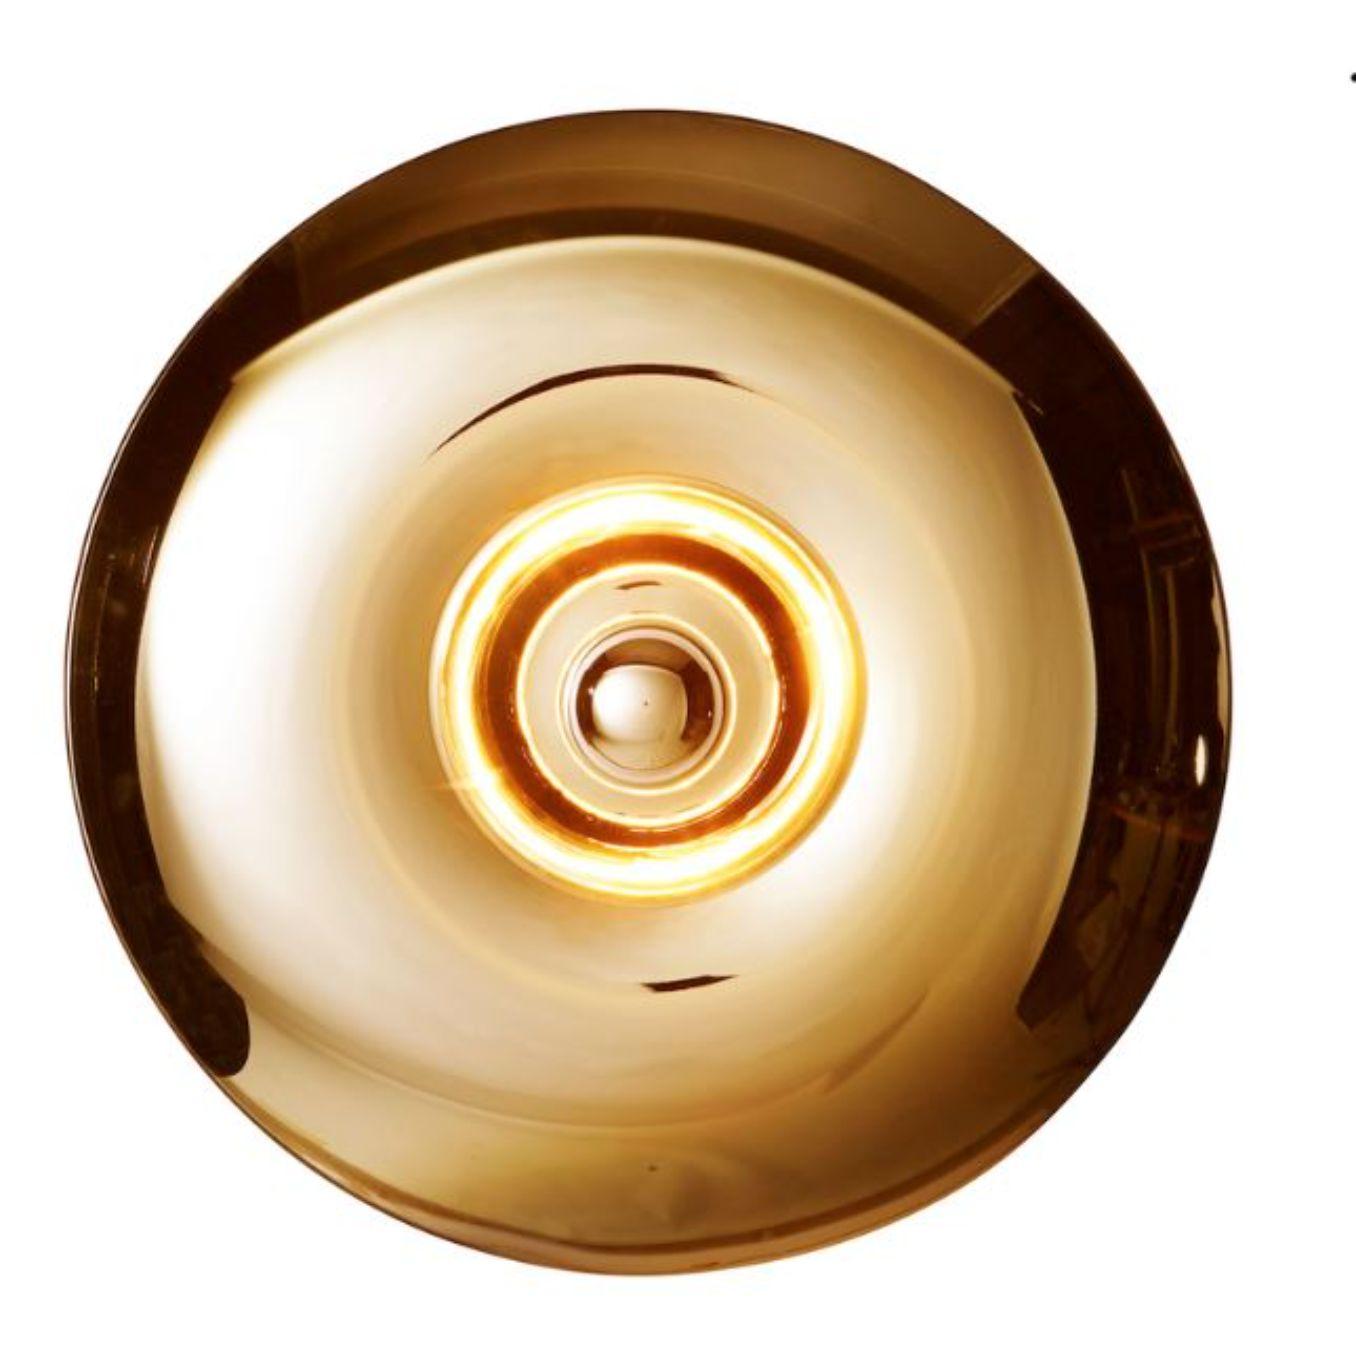 Large gold Bombato wall light by RADAR
Design: Bastien Taillard
Materials: Metal, glass. 
Dimensions: W 70 x D 20 x H 70 cm
Also available in different colors (gold, bronze, Iris) and materials (solid Oak). 

All our lamps can be wired